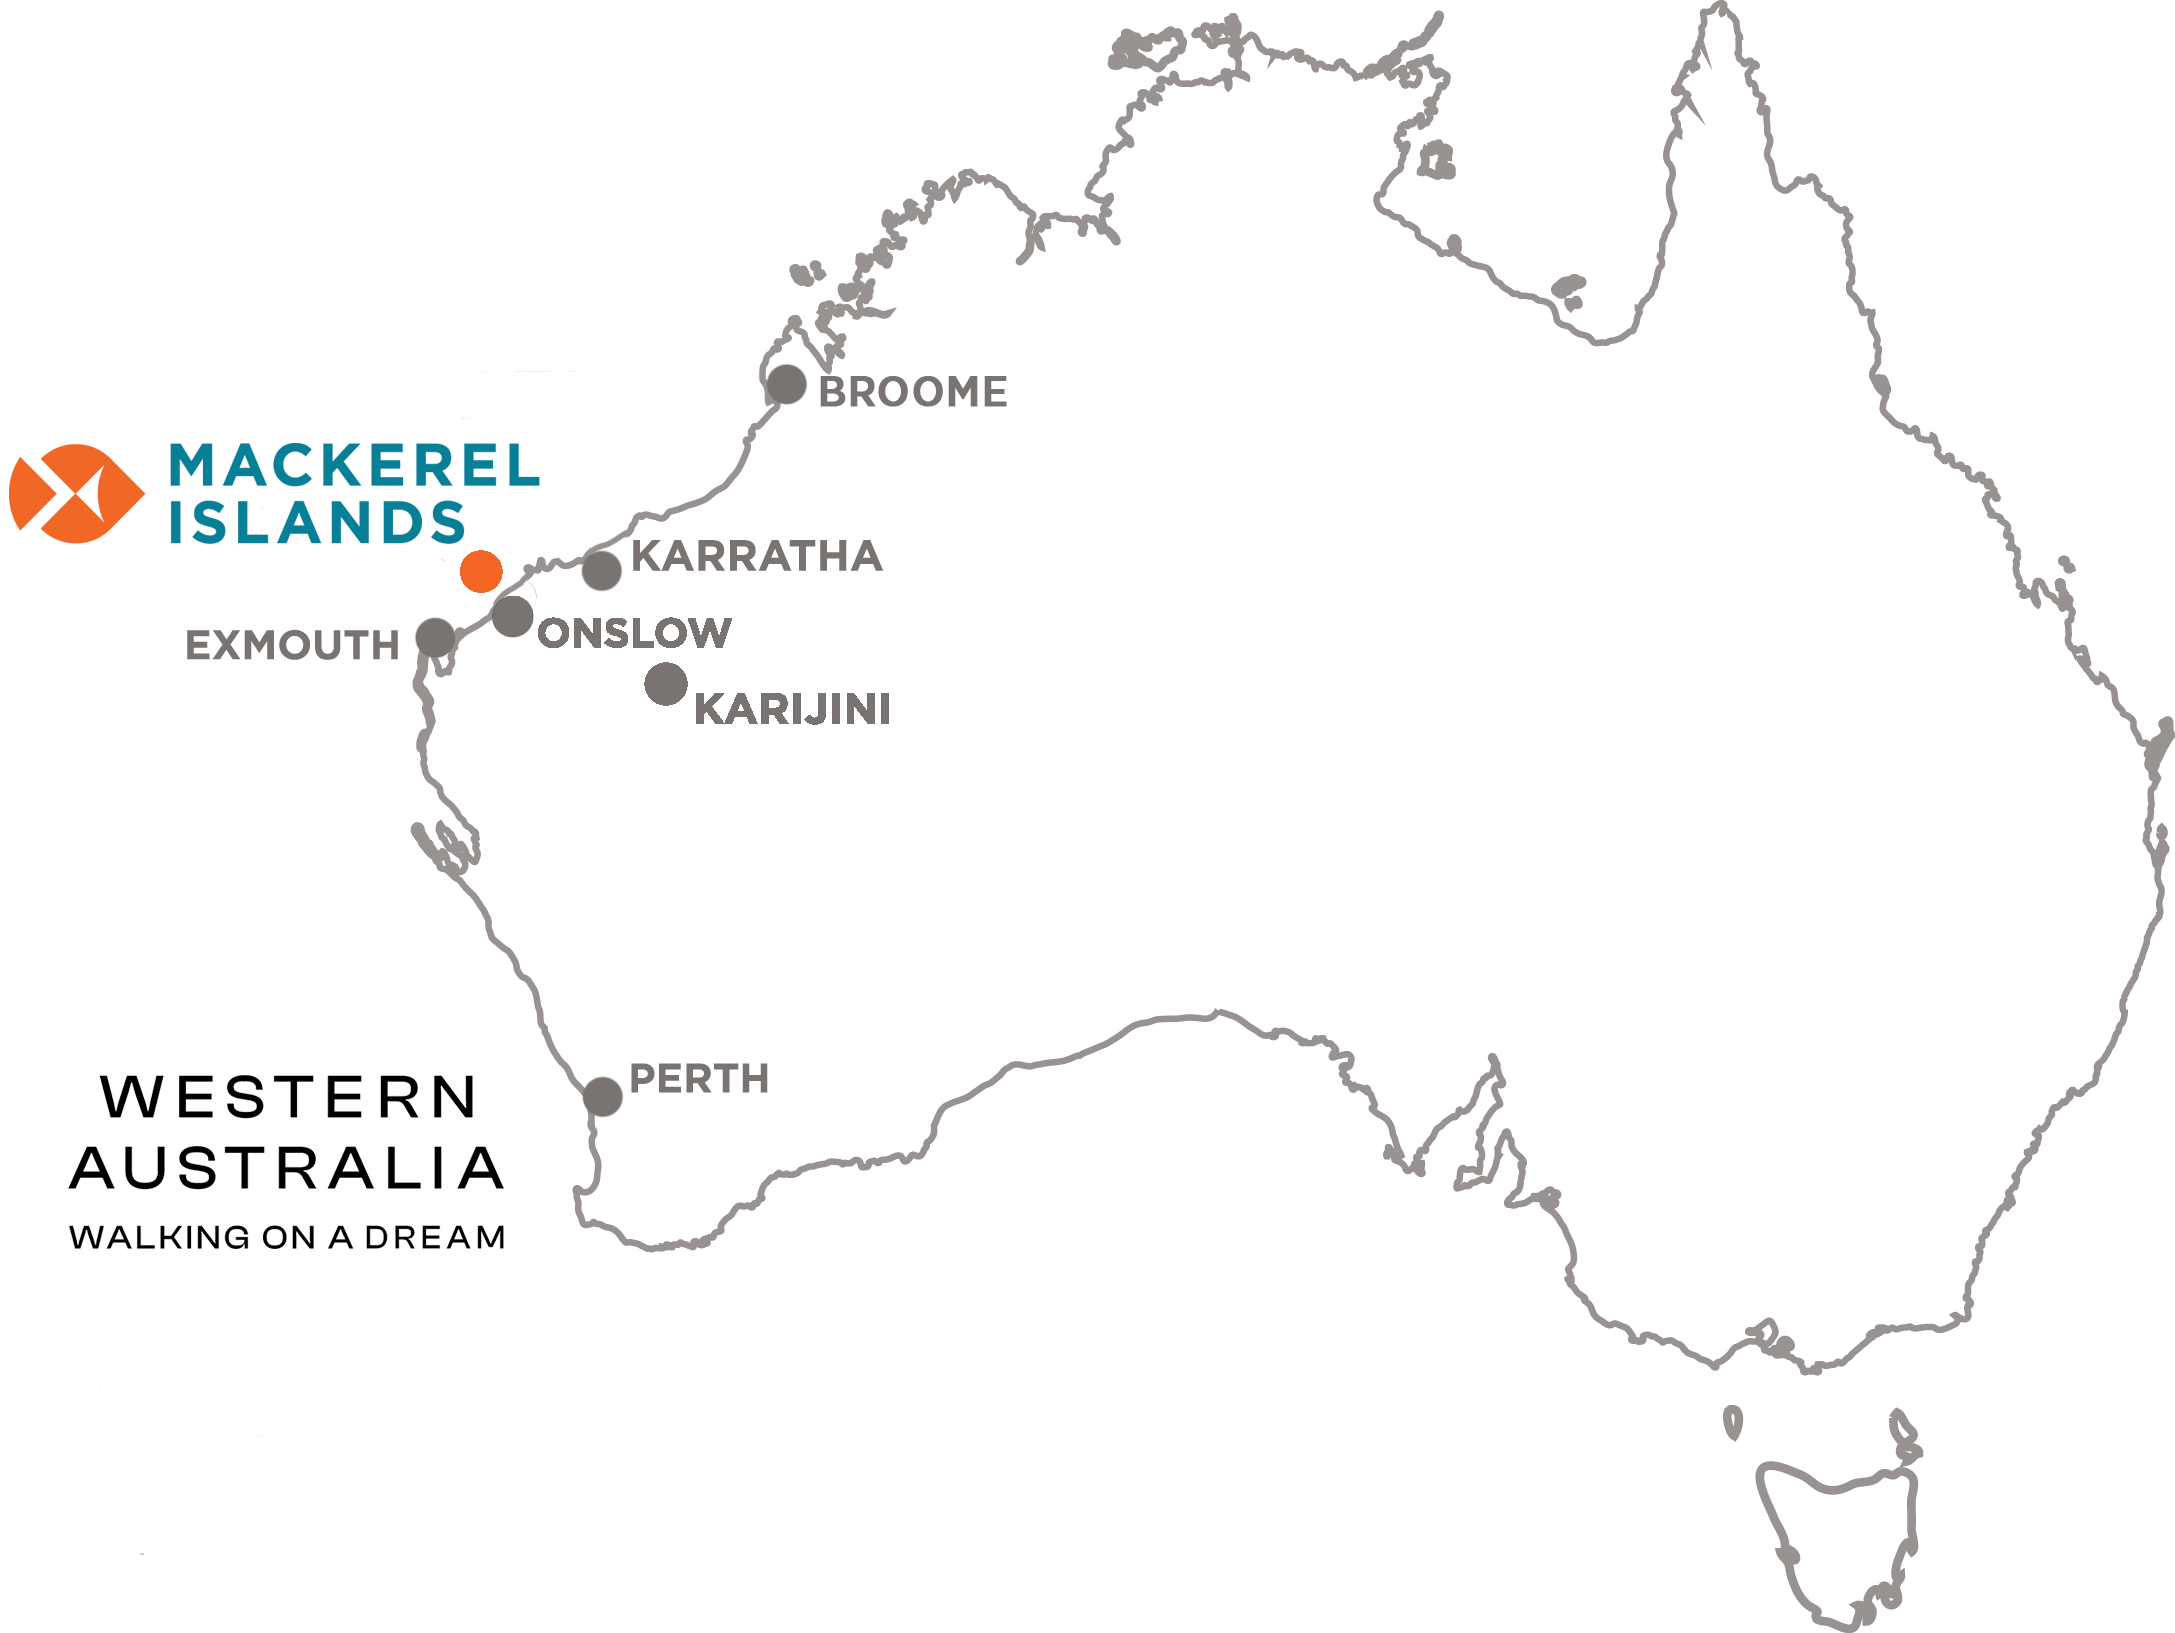 Map showing the location of the Mackerel Islands in Western Australia